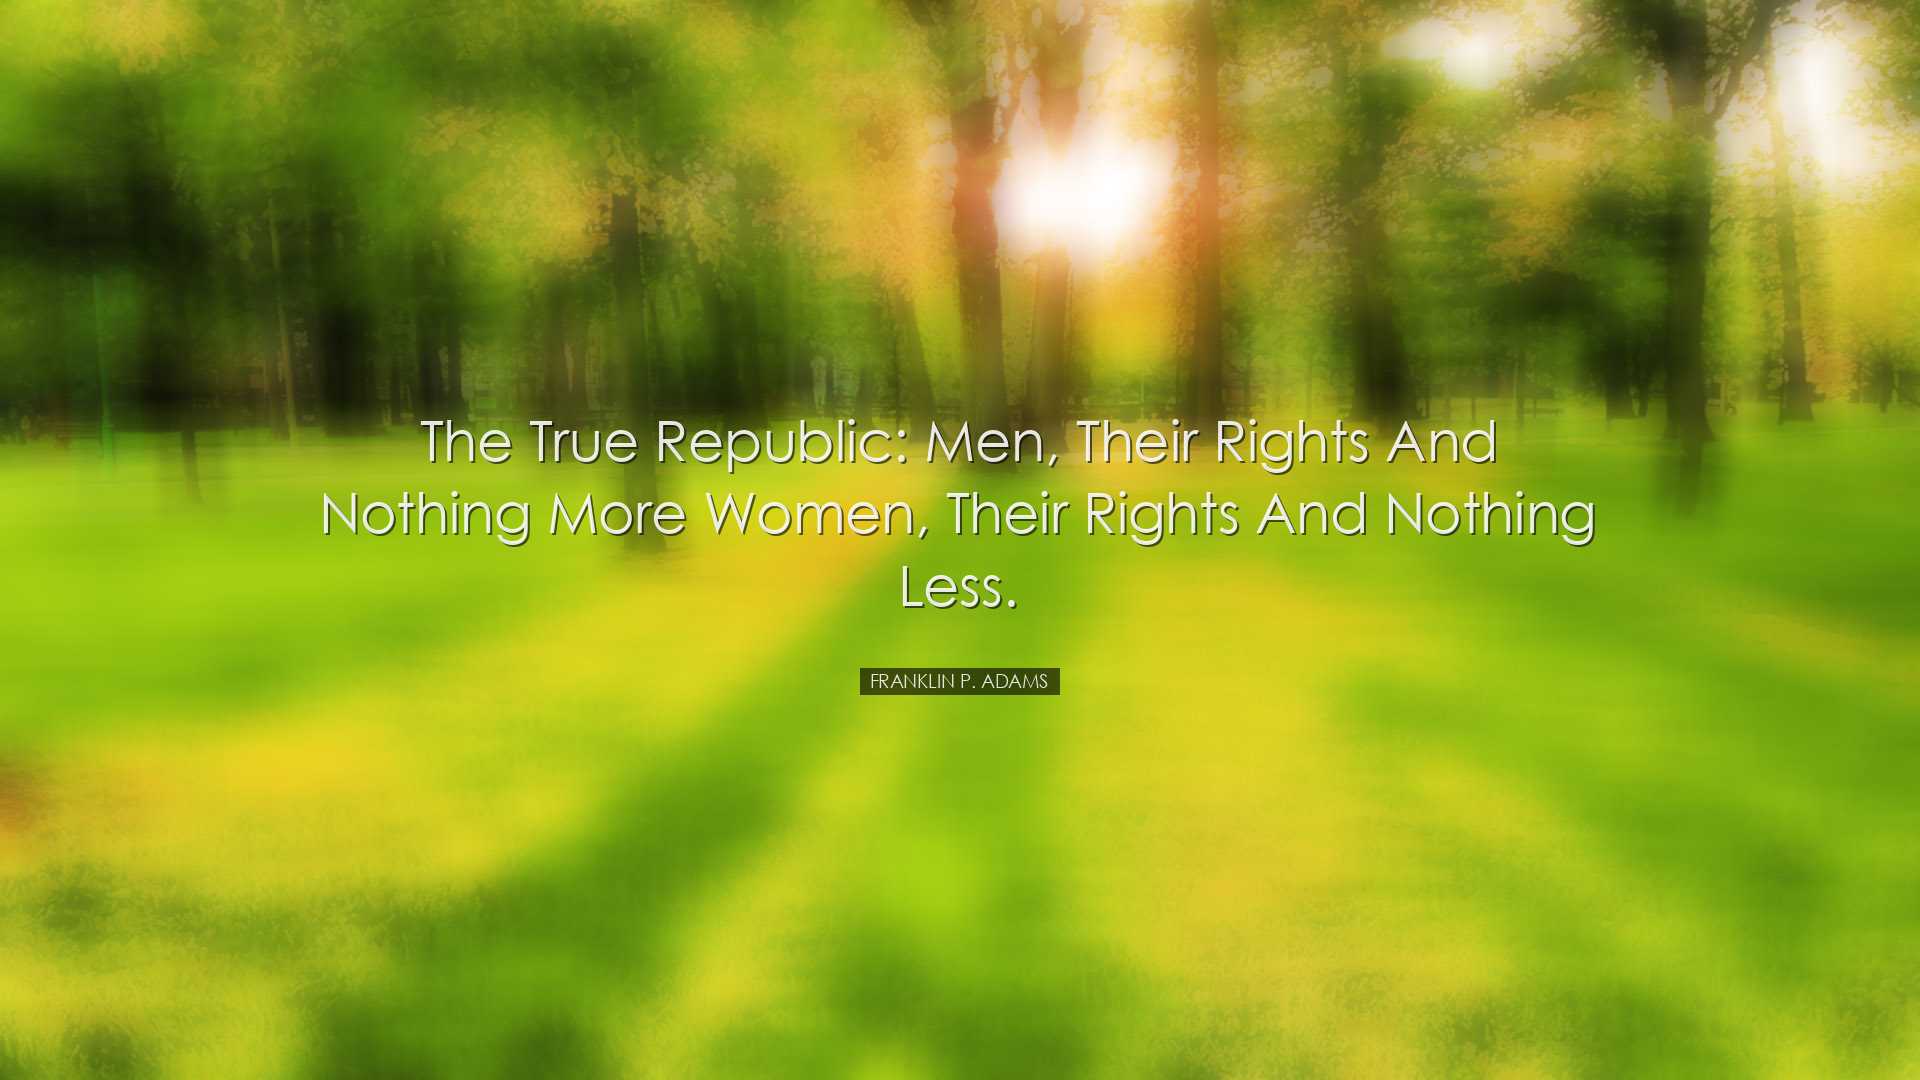 The true republic: men, their rights and nothing more women, their